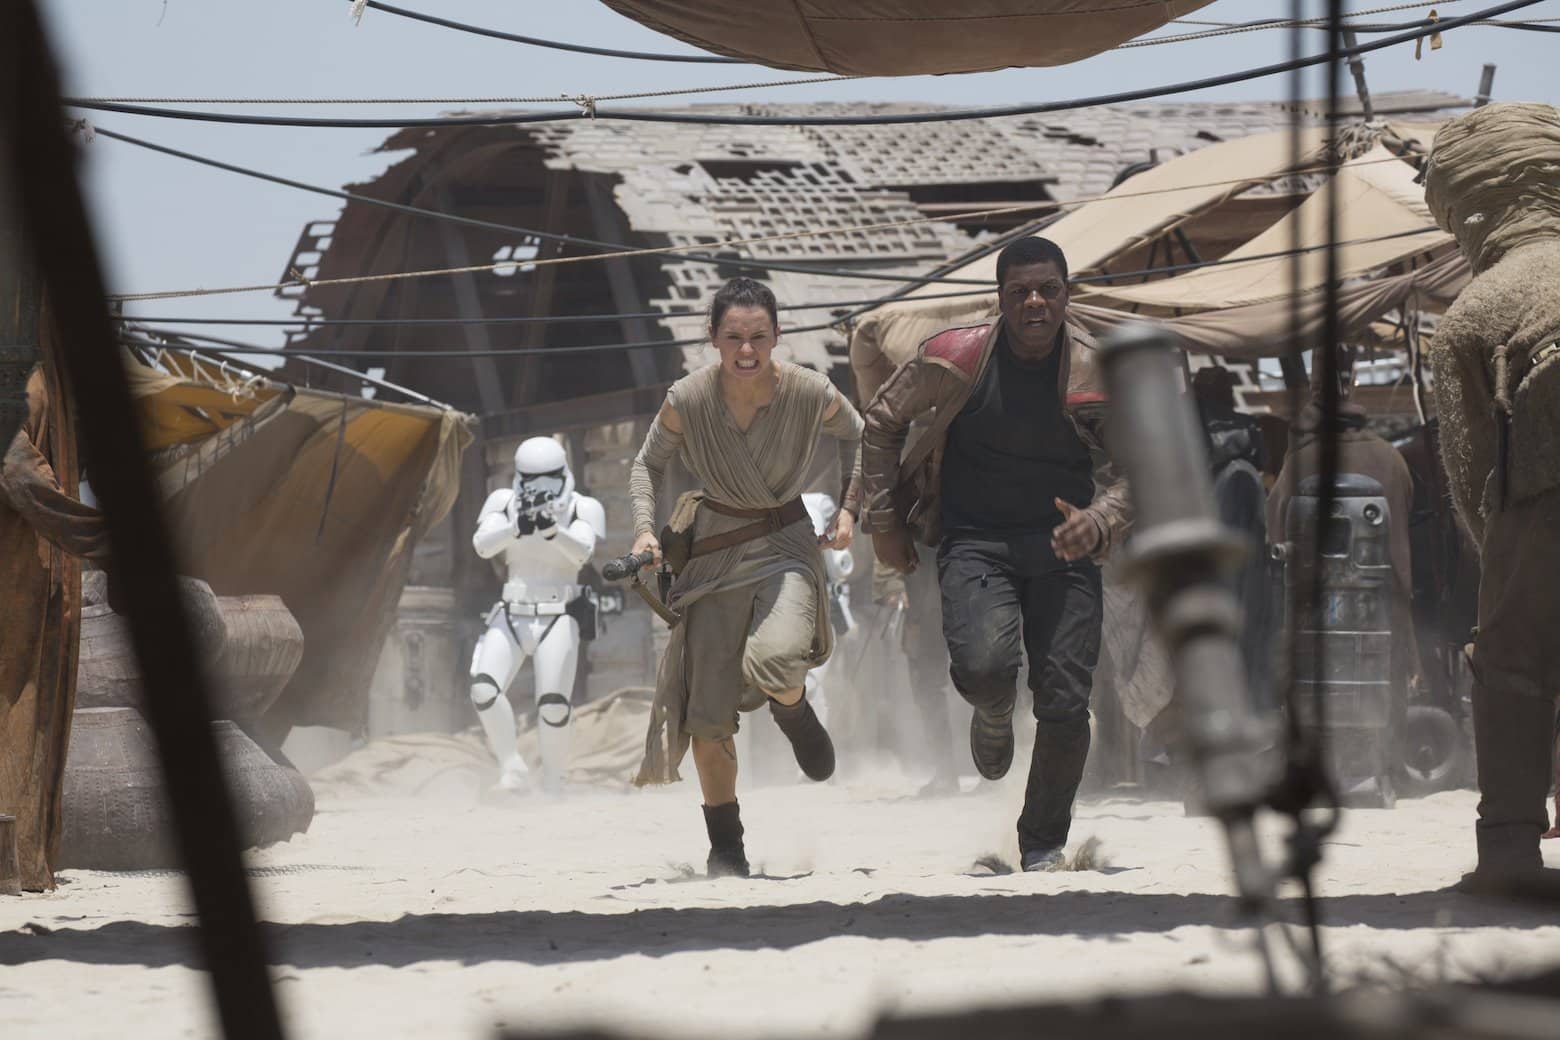 Star Wars VII The Force Awakens 15 - Rey anf Finn run from stormtroopers